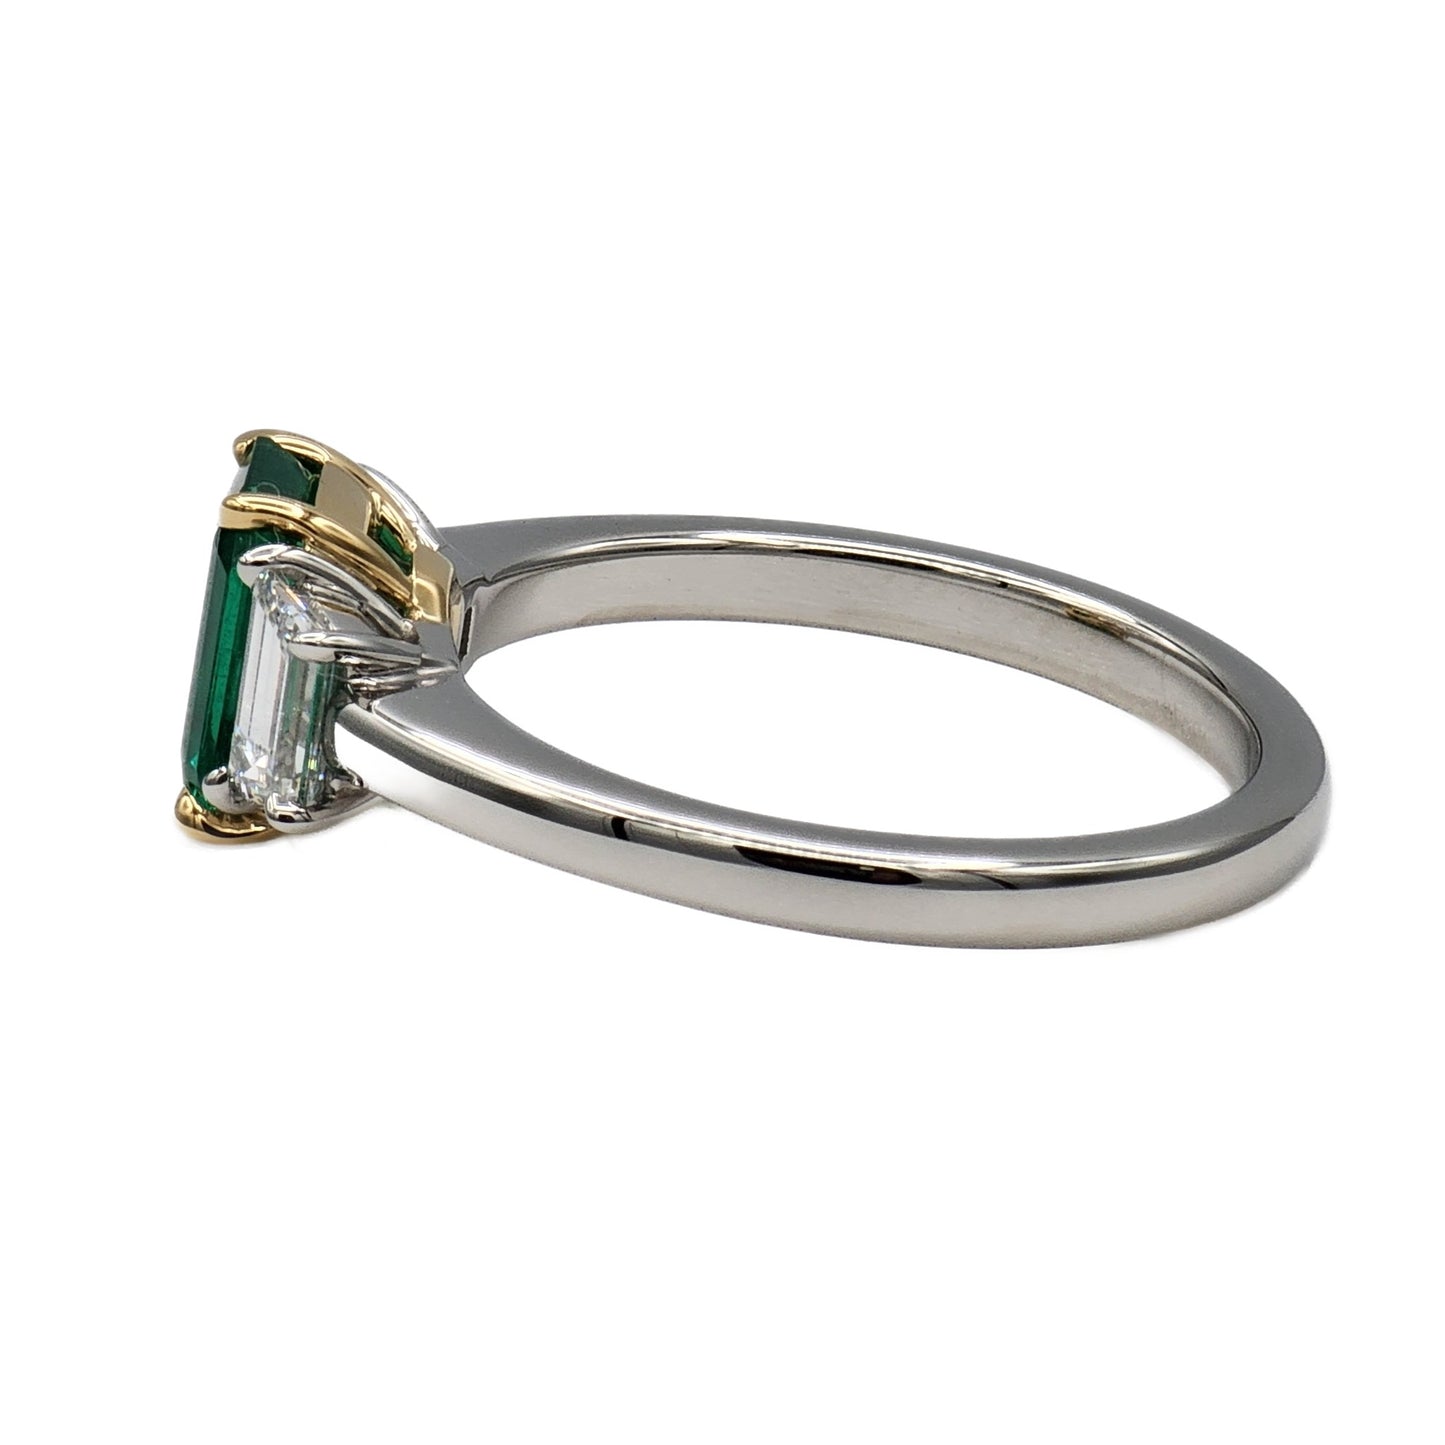 1.10 Carat Emerald Cut Emerald and 2=0.58 Trapezoid Diamond Ring in Platinum and 18K